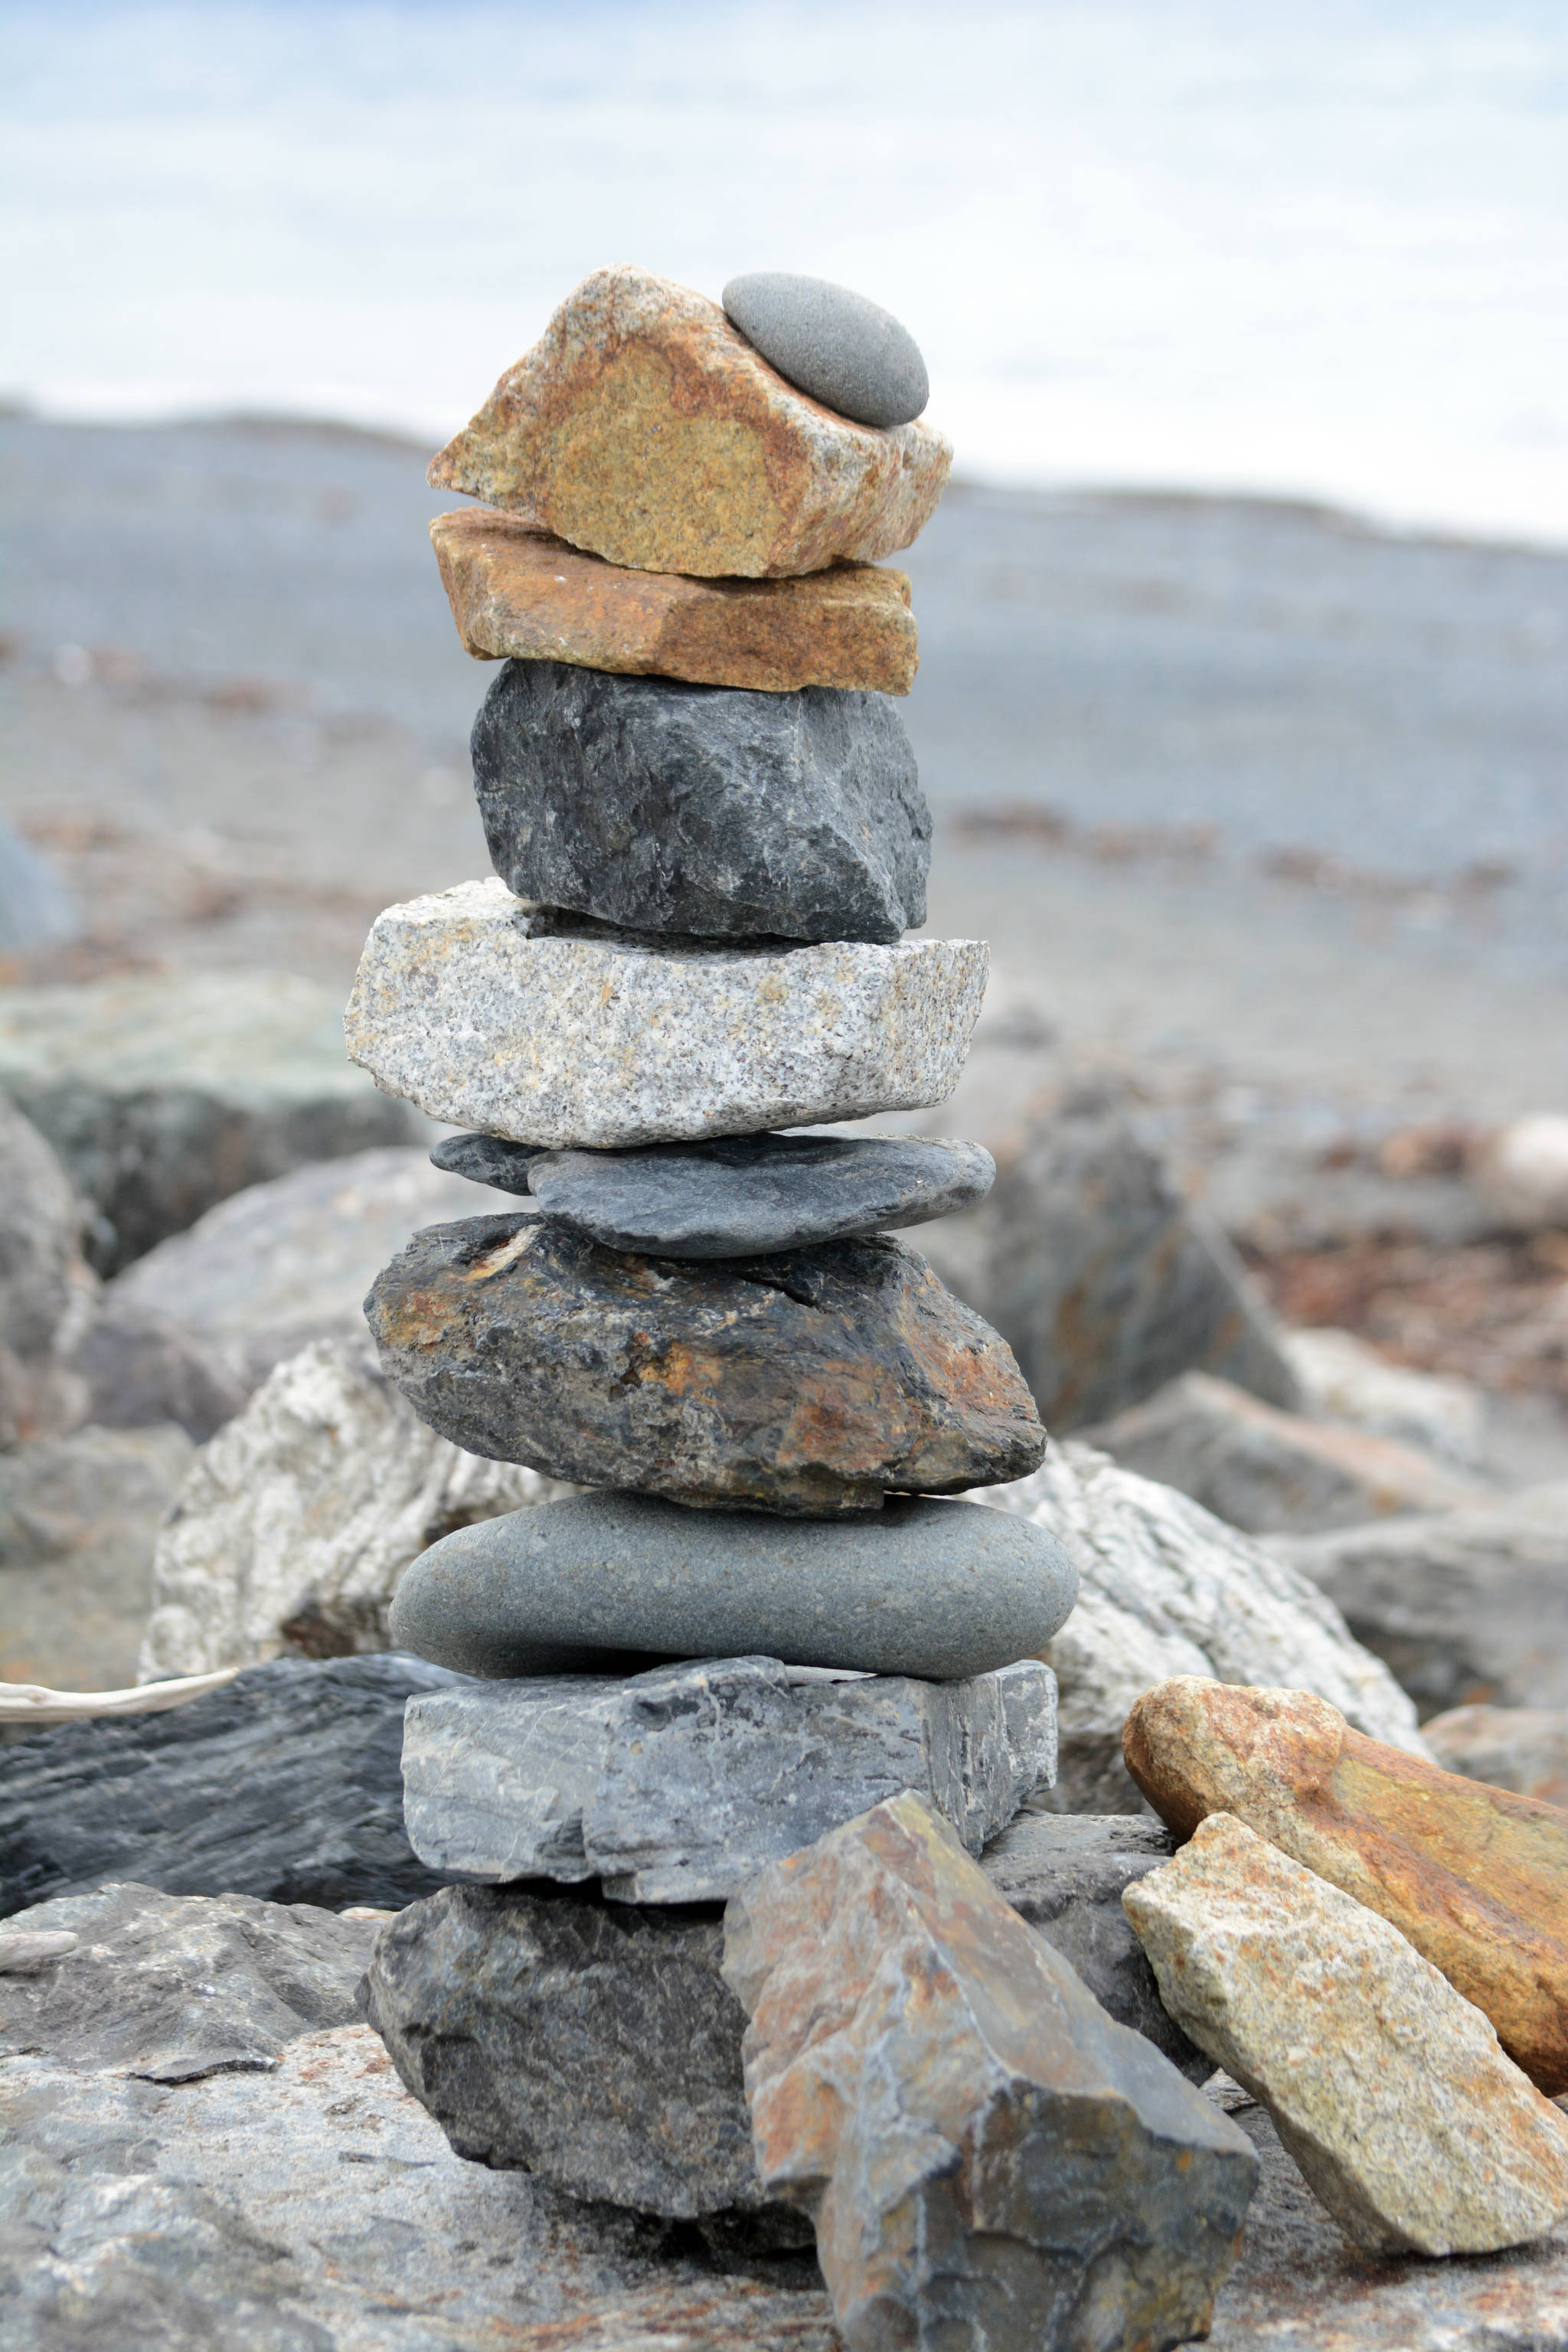 A rock sculpture is one of dozens an artist made along the Homer Spit last week, as seen in this photo taken Friday, Sept. 21, 2018, in Homer, Alaska. (Photo by Michael Armstrong/Homer News)